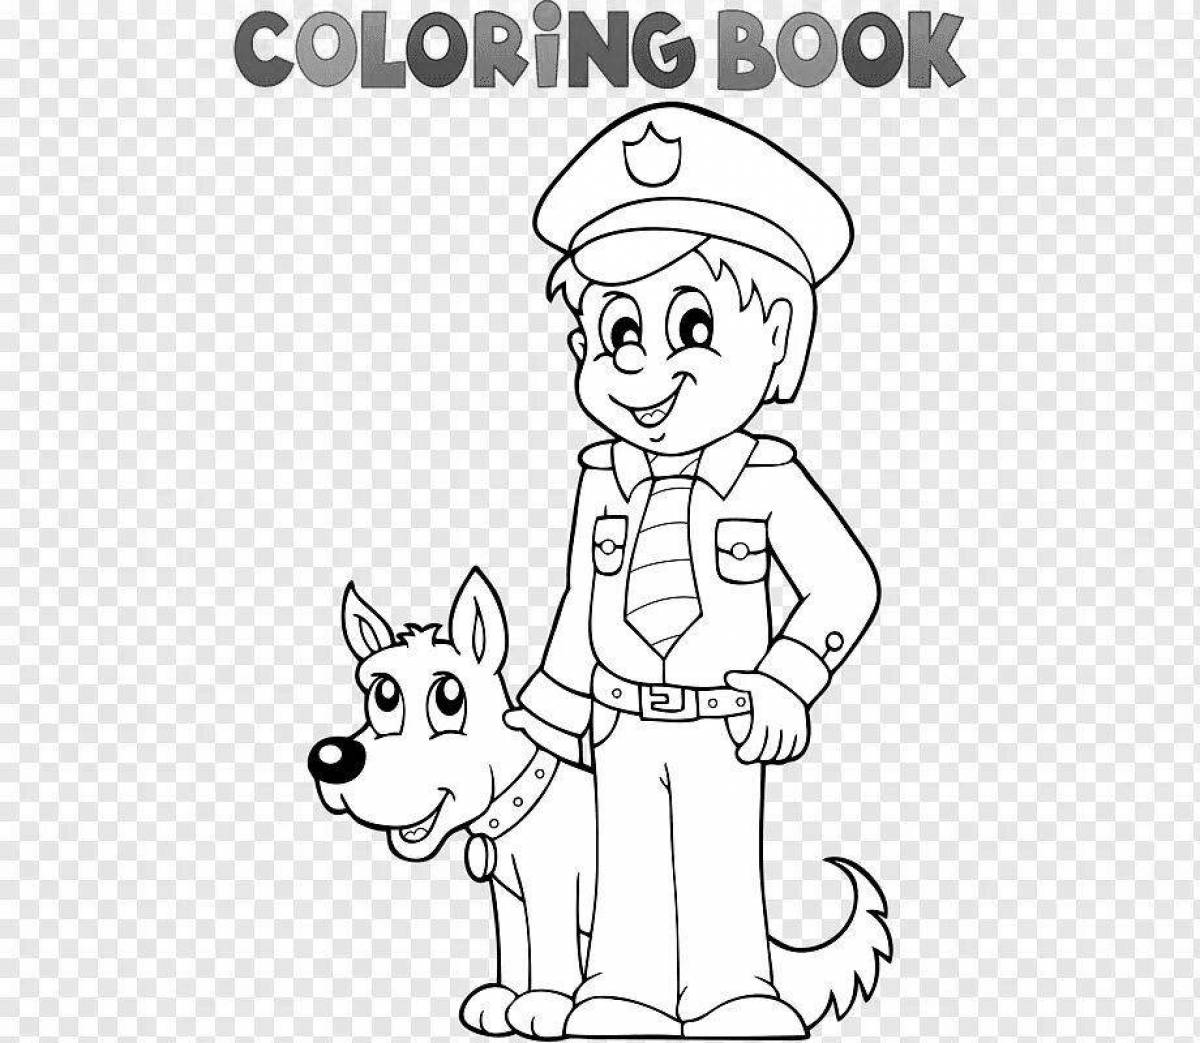 Coloring page elegant soldier with dog